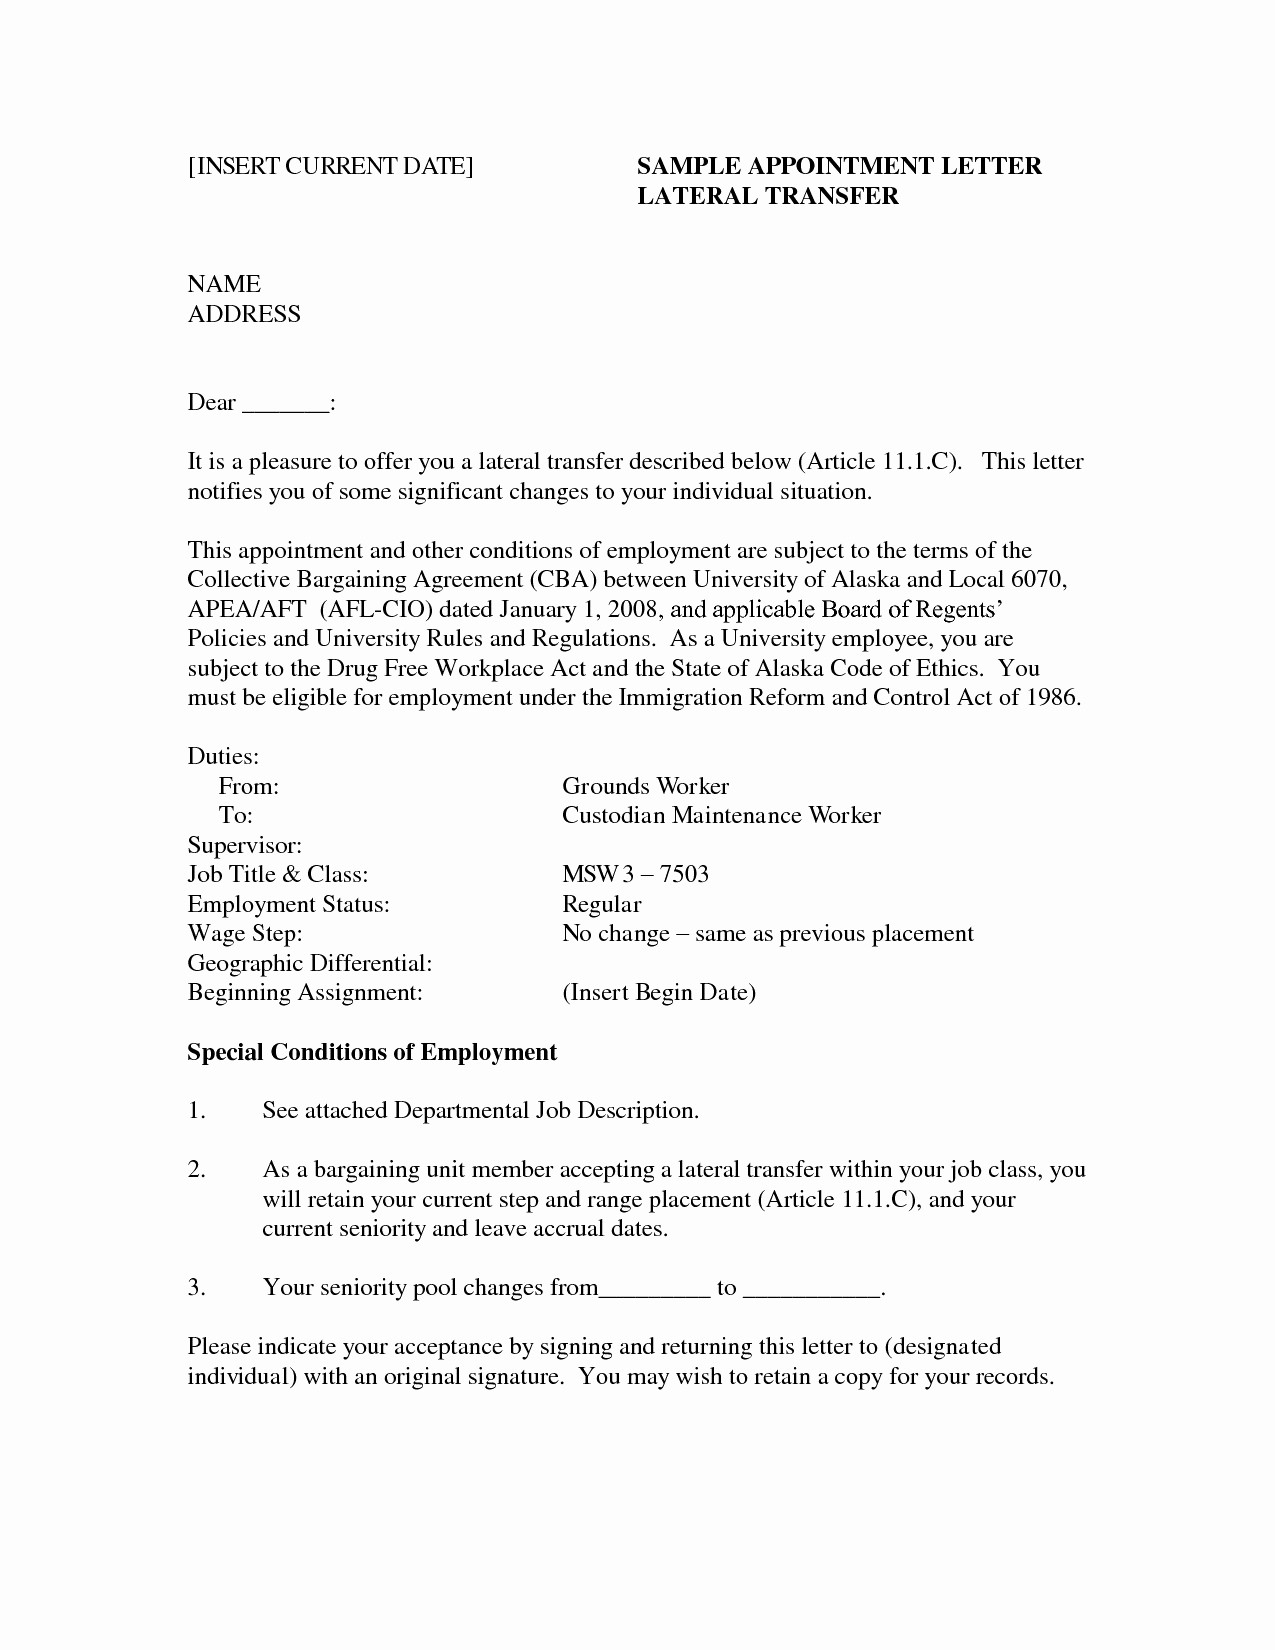 Receptionist Cover Letter Template - Cv Resume Cover Letter New Cv Resume Receptionist New Resume Cover